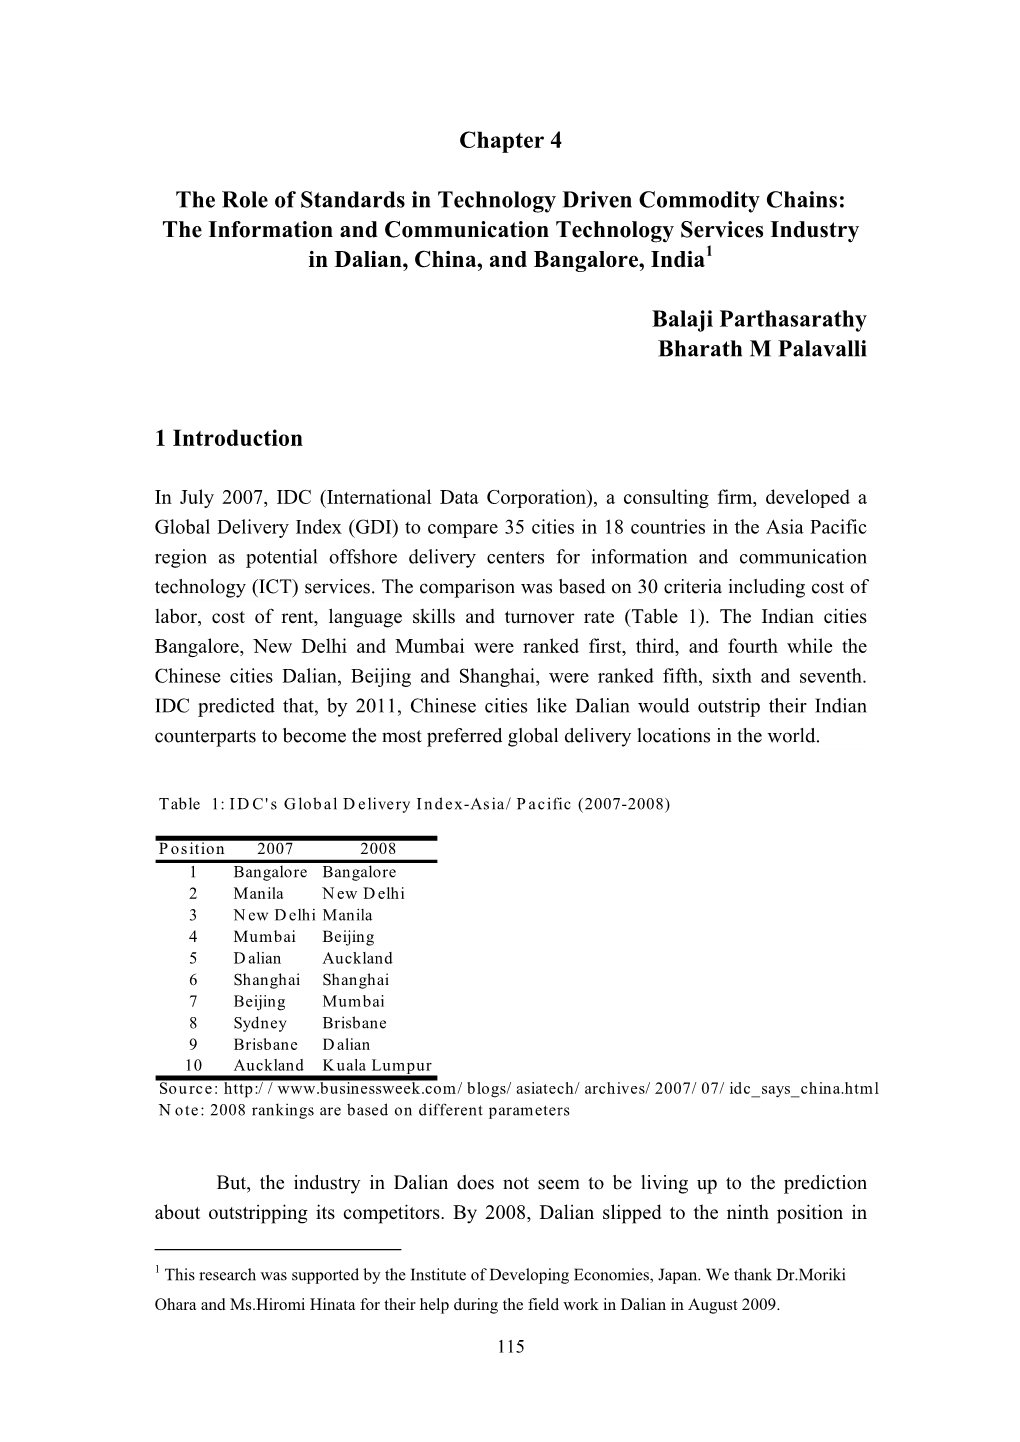 The Role of Standards in Technology Driven Commodity Chains: the Information and Communication Technology Services Industry in Dalian, China, and Bangalore, India1